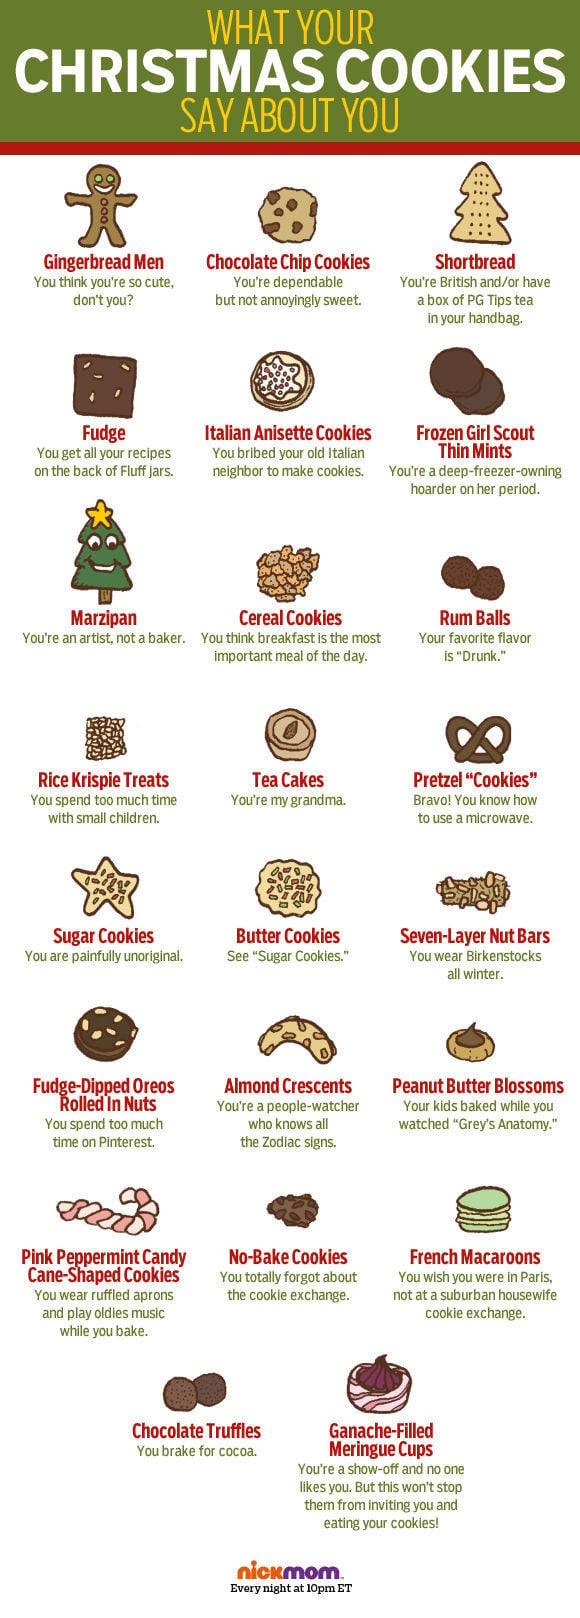 146220-What-Your-Christmas-Cookie-Says-About-You